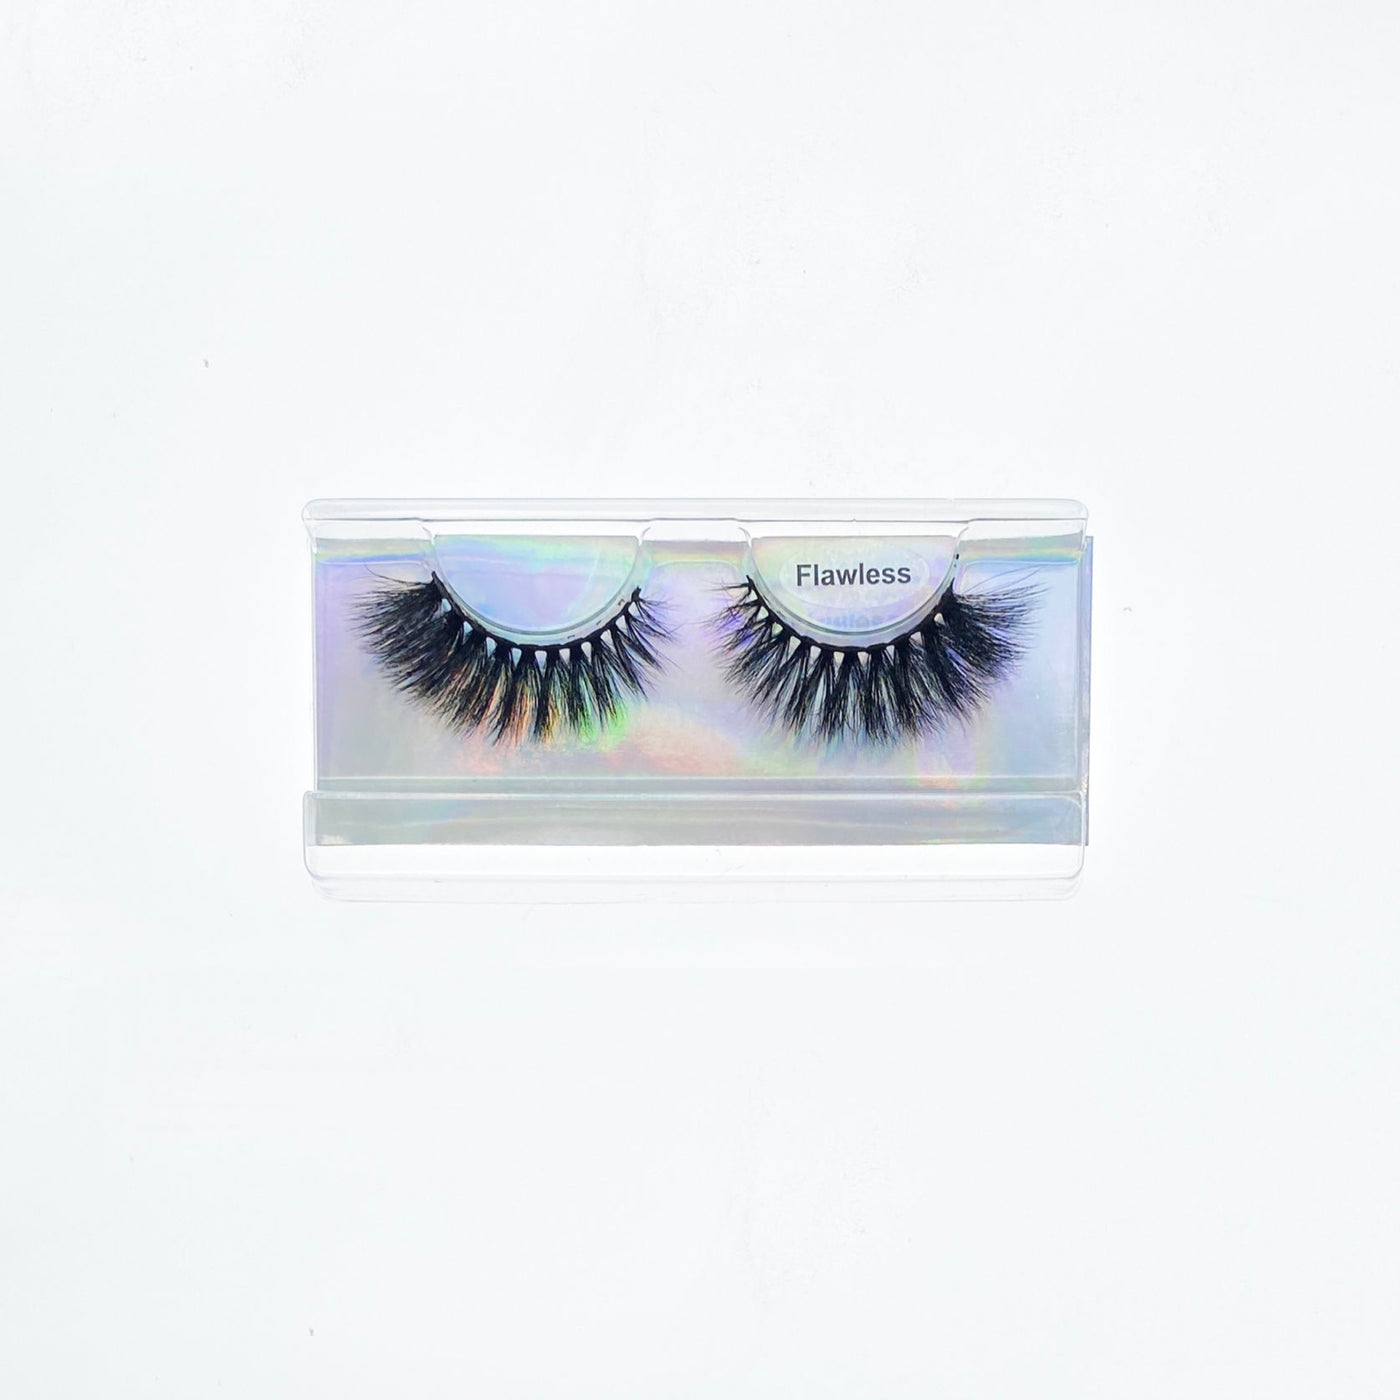 5D Luxury Mink Eyelashes : FLAWLESS - Glam Xten Collection